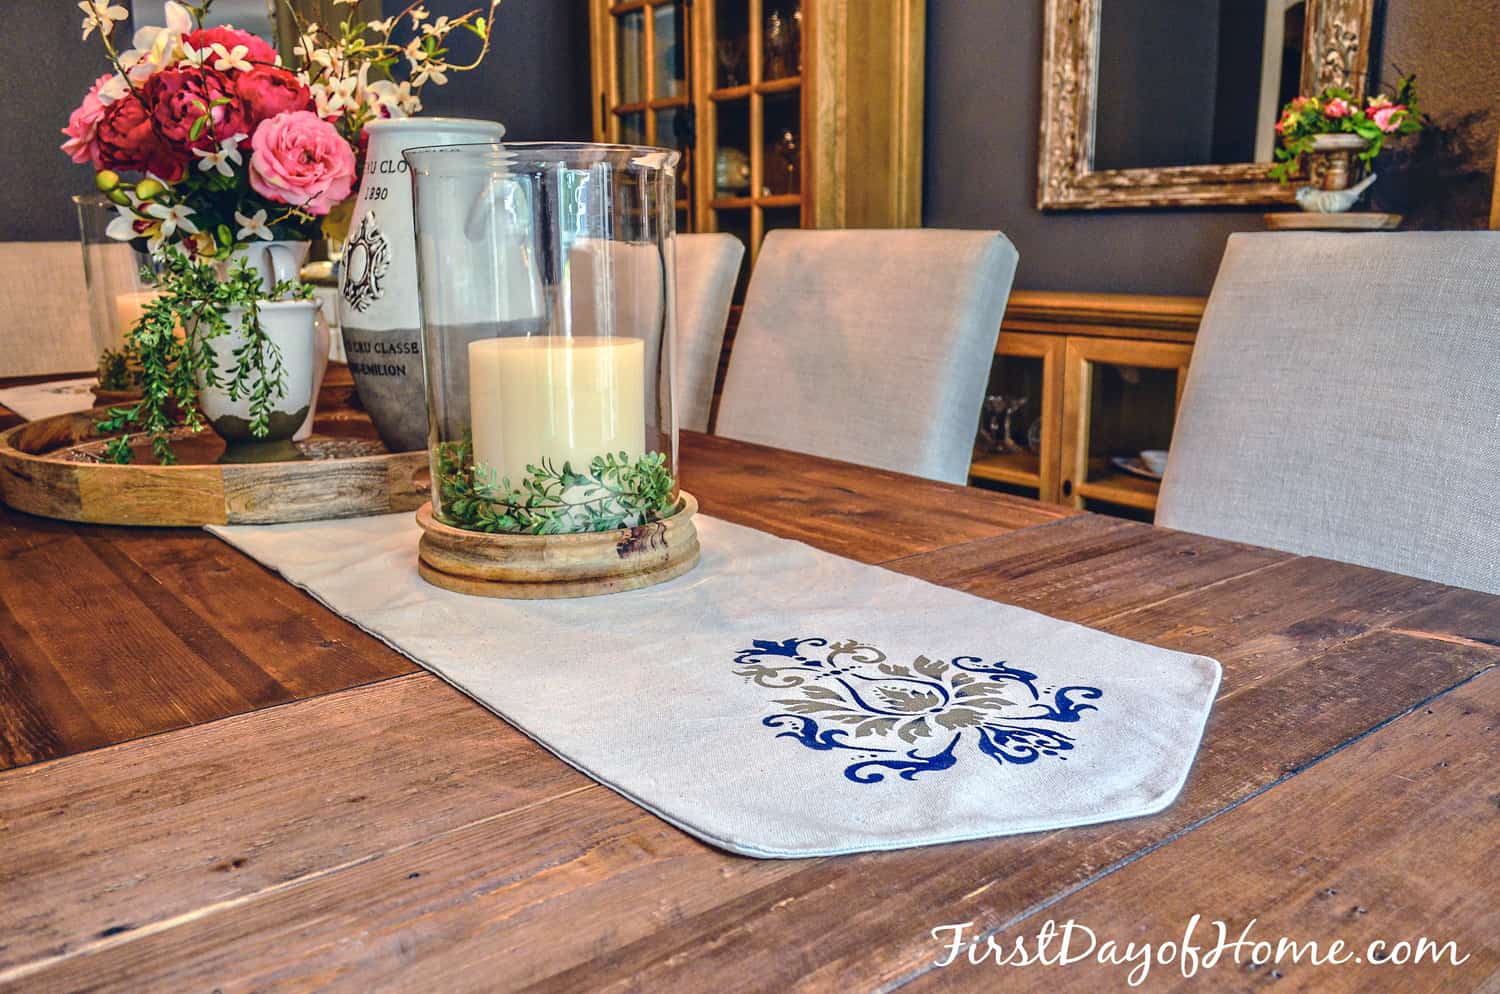 Finished DIY table runner with stenciled design shown on dining room table